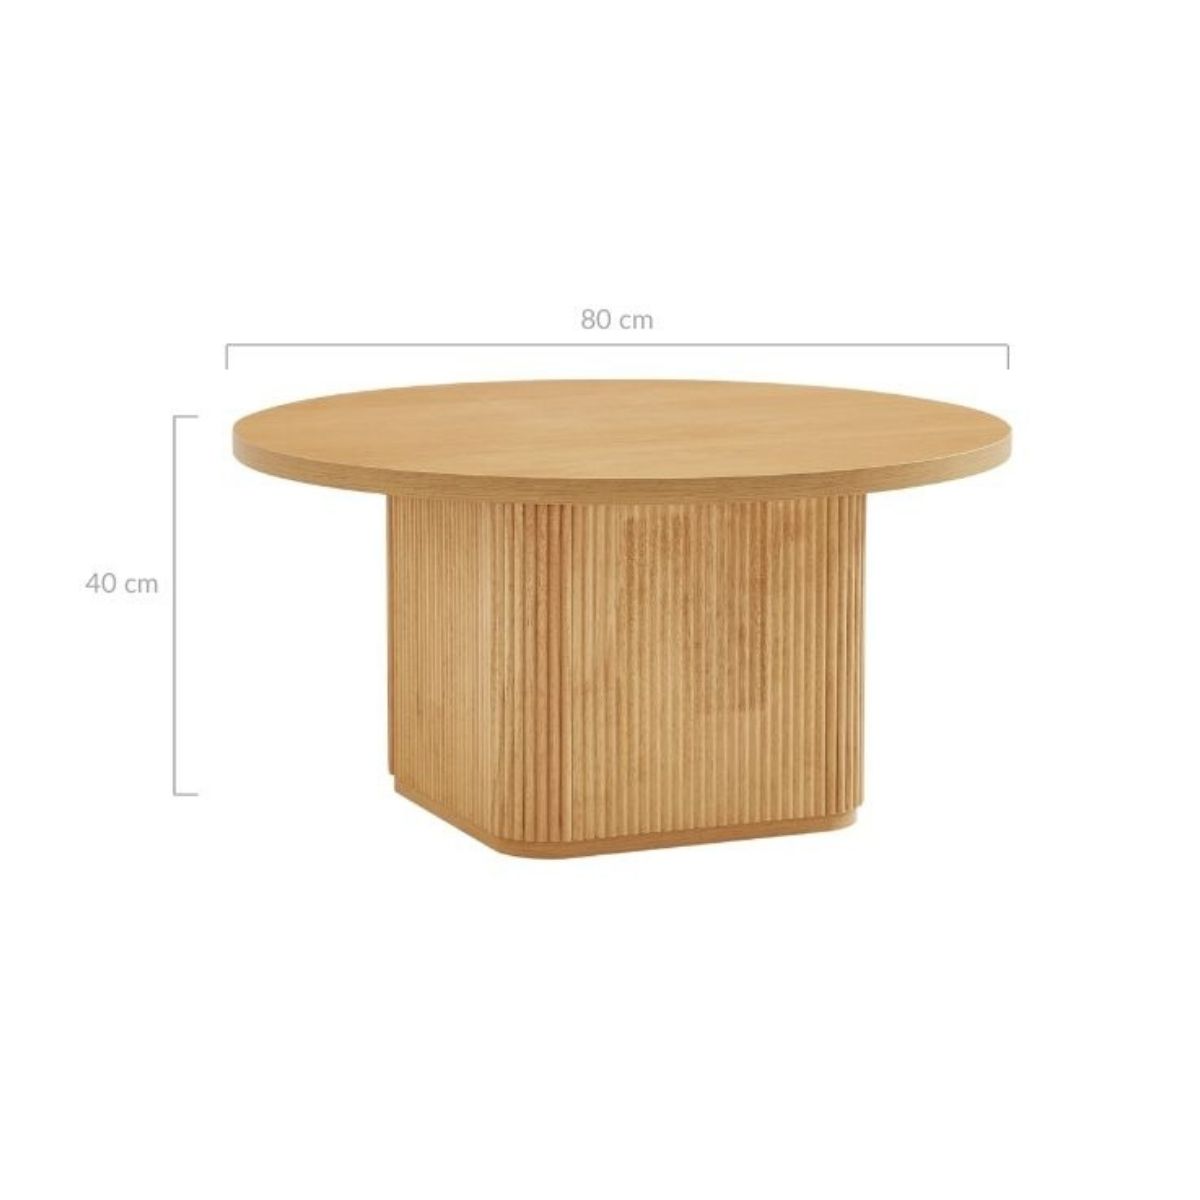 Ember Round Column Coffee Table in Natural